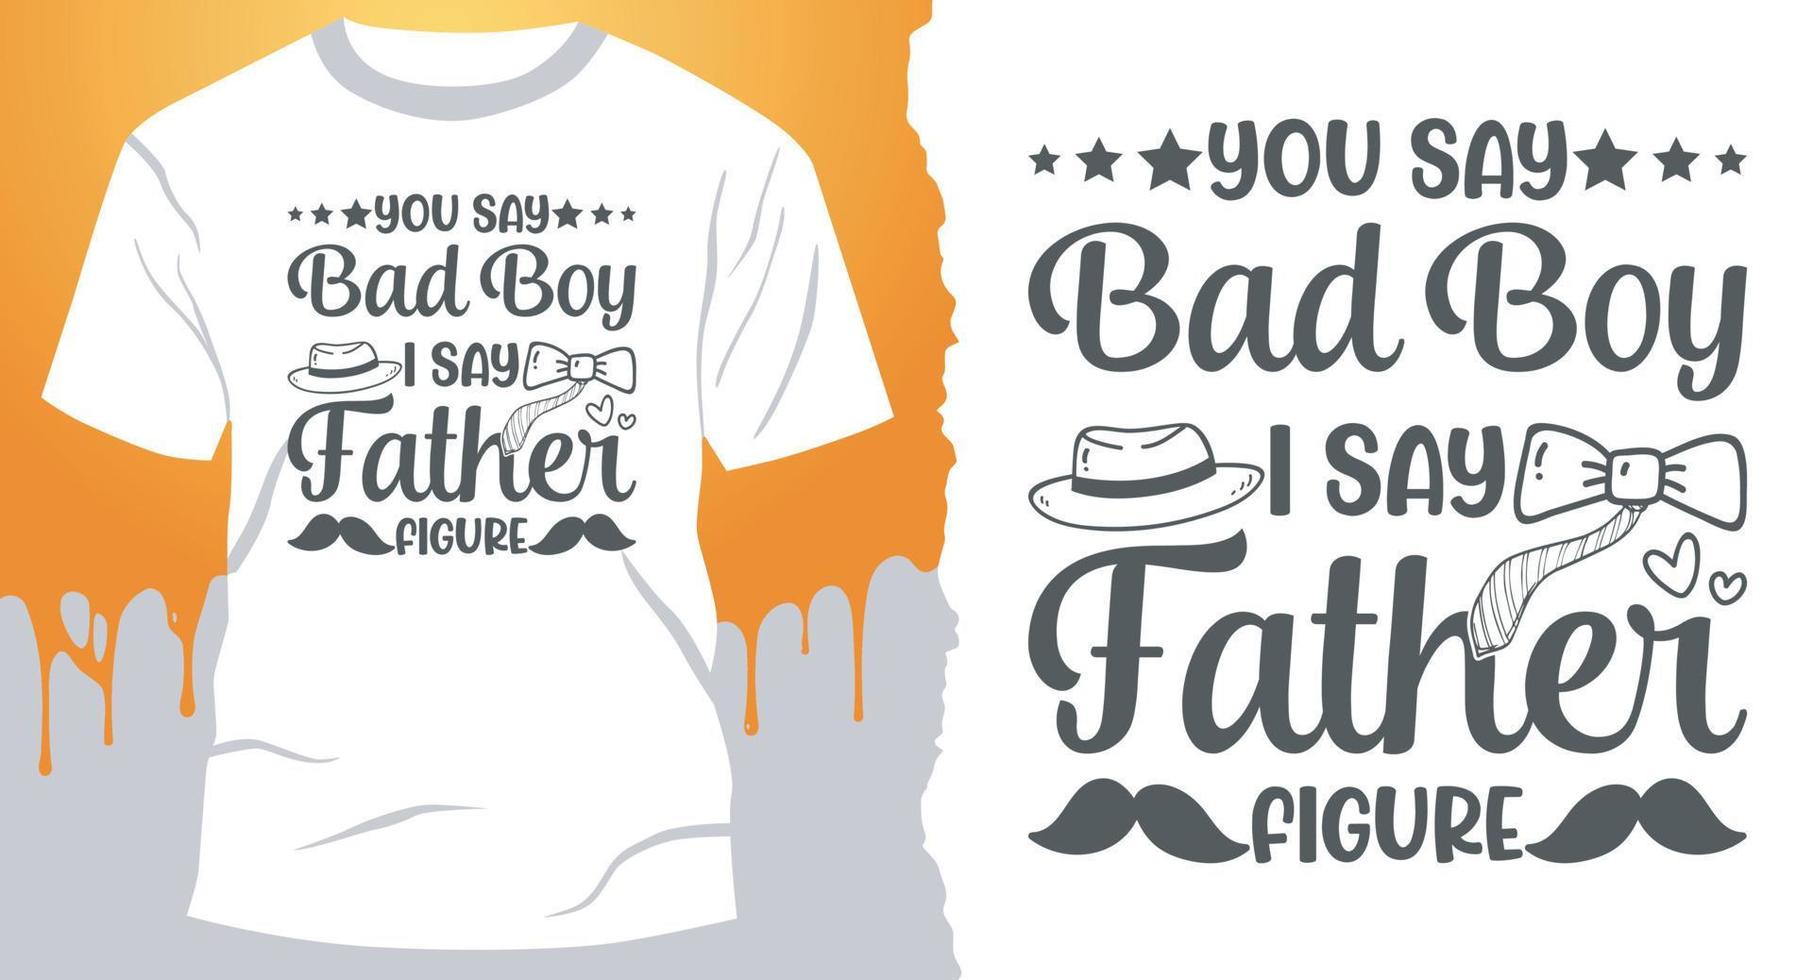 You Say Bad Boy I Say Father Figure. Best Dad gift shirt design vector